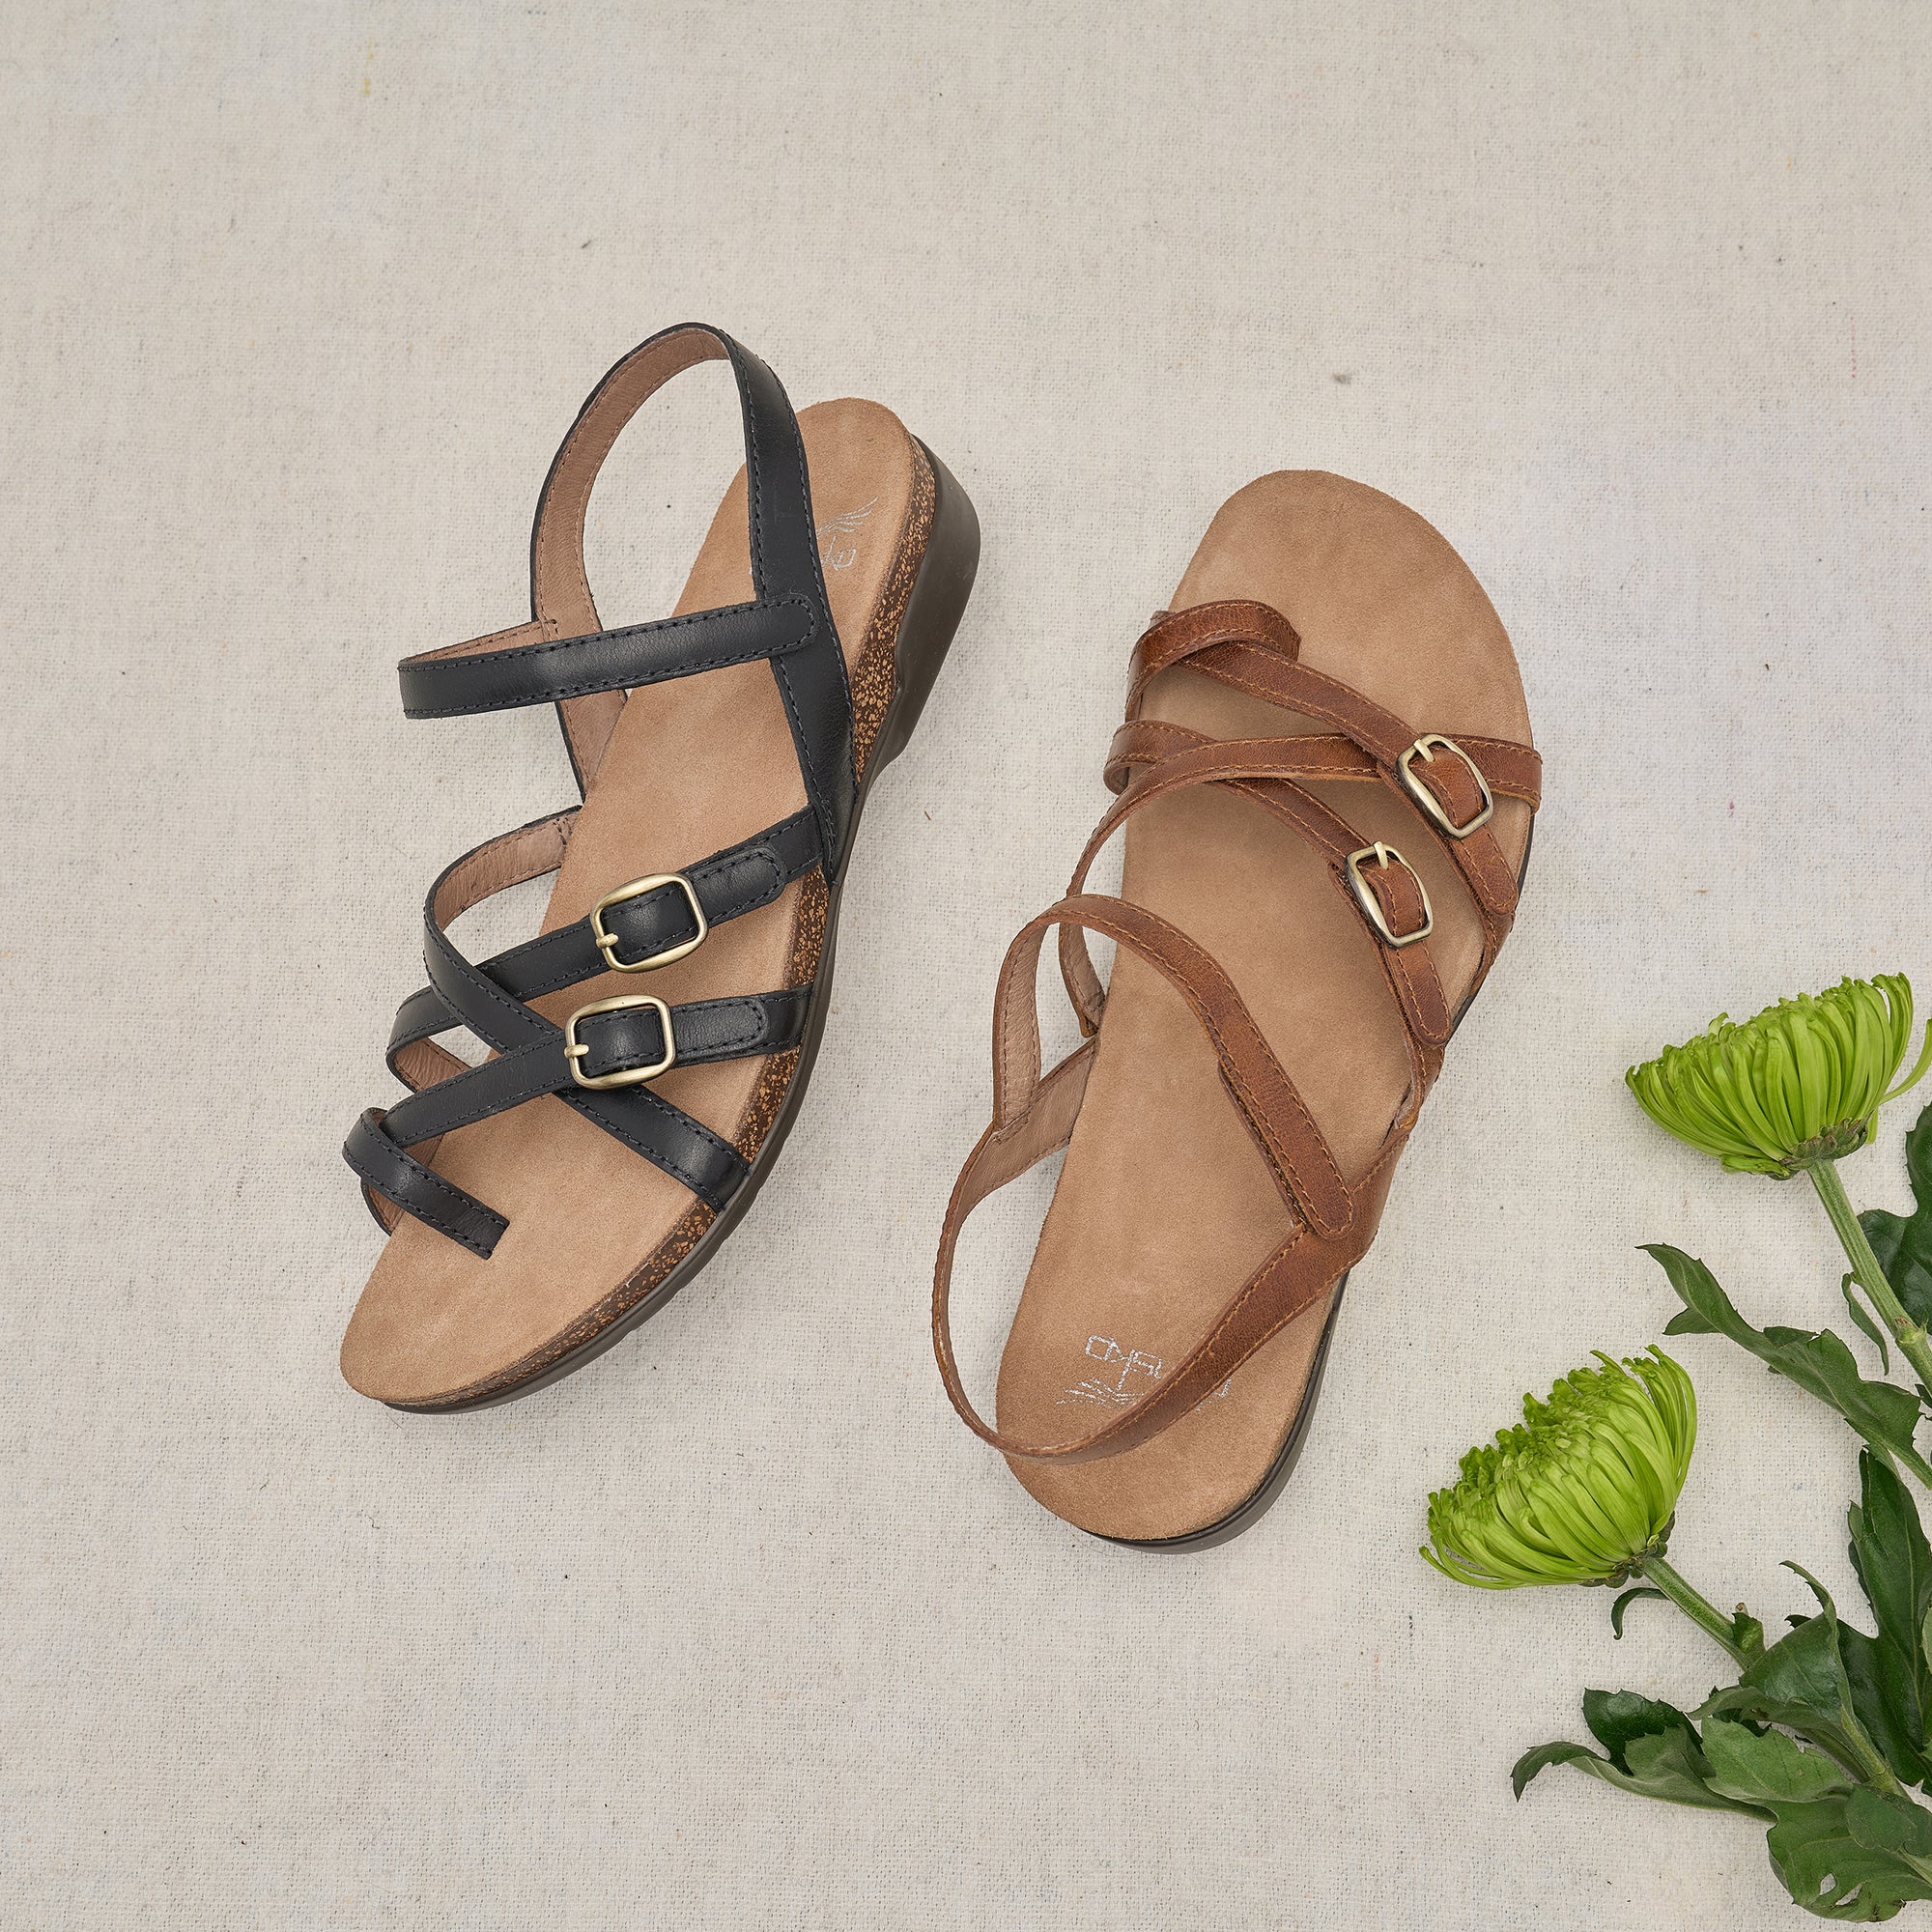 Two different colored leather uppers on a cork-sole flat sandal.